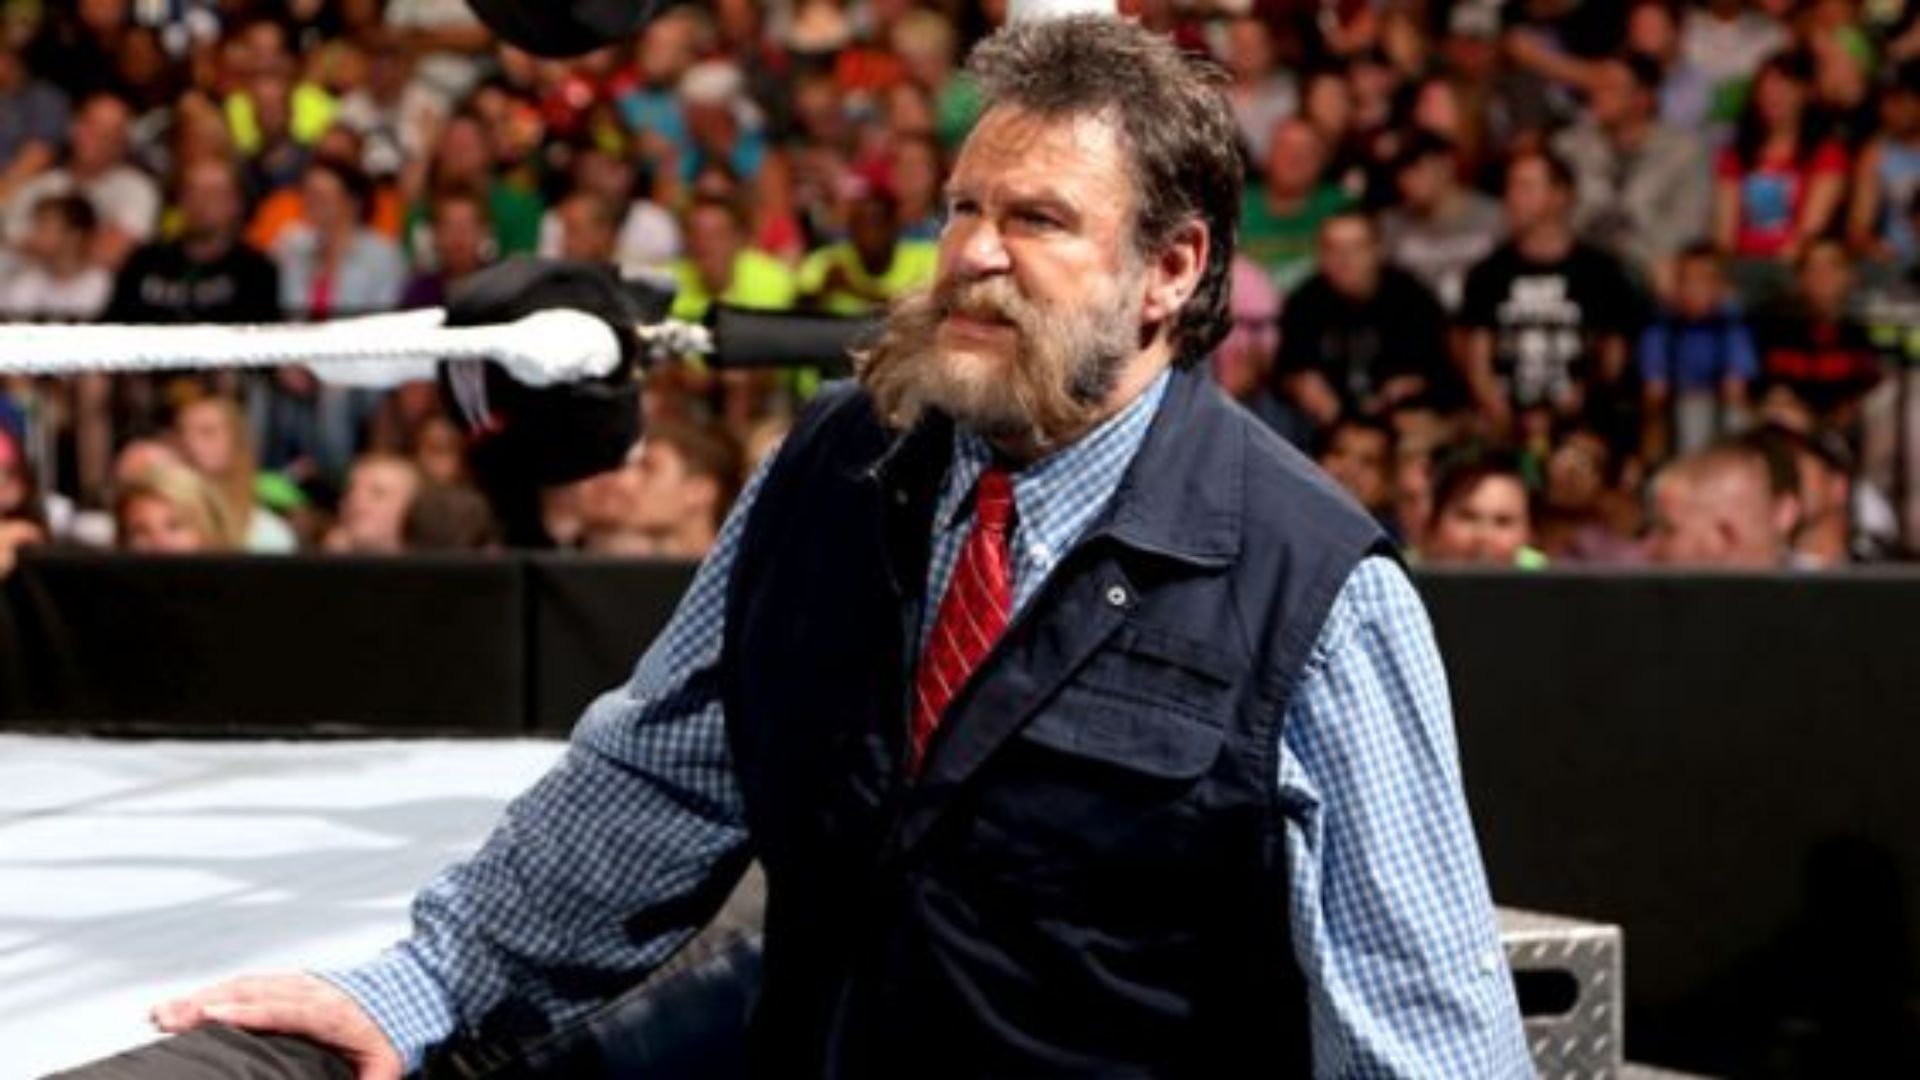 Dutch Mantell, formerly known as Zeb Colter in WWE